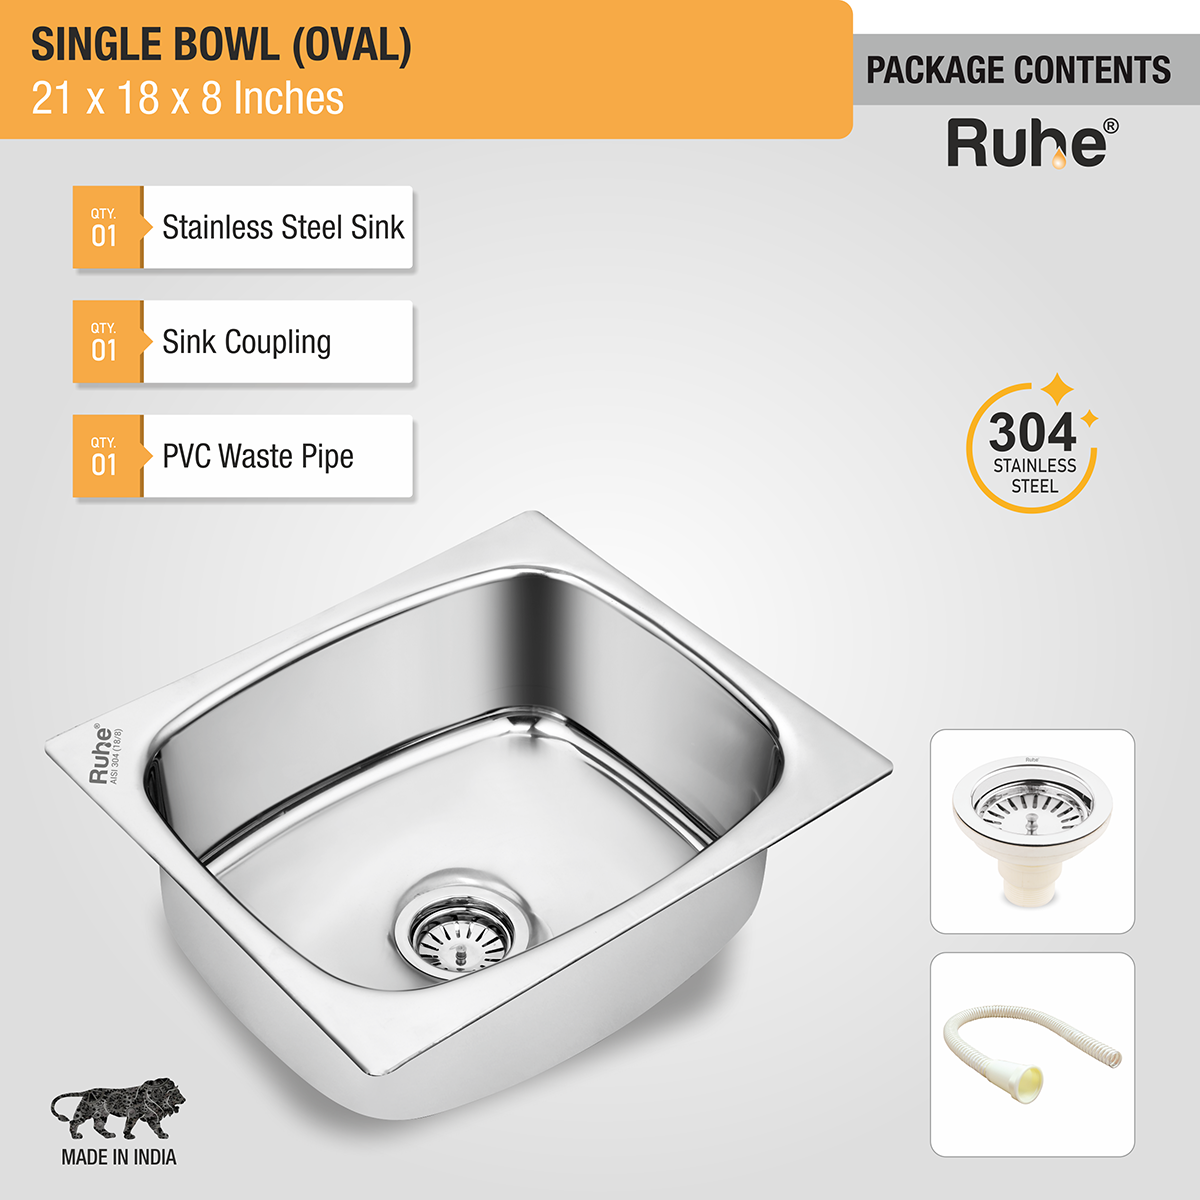 Oval Single Bowl (21 x 18 x 8 inches) 304-Grade Kitchen Sink with coupling, waste pipe